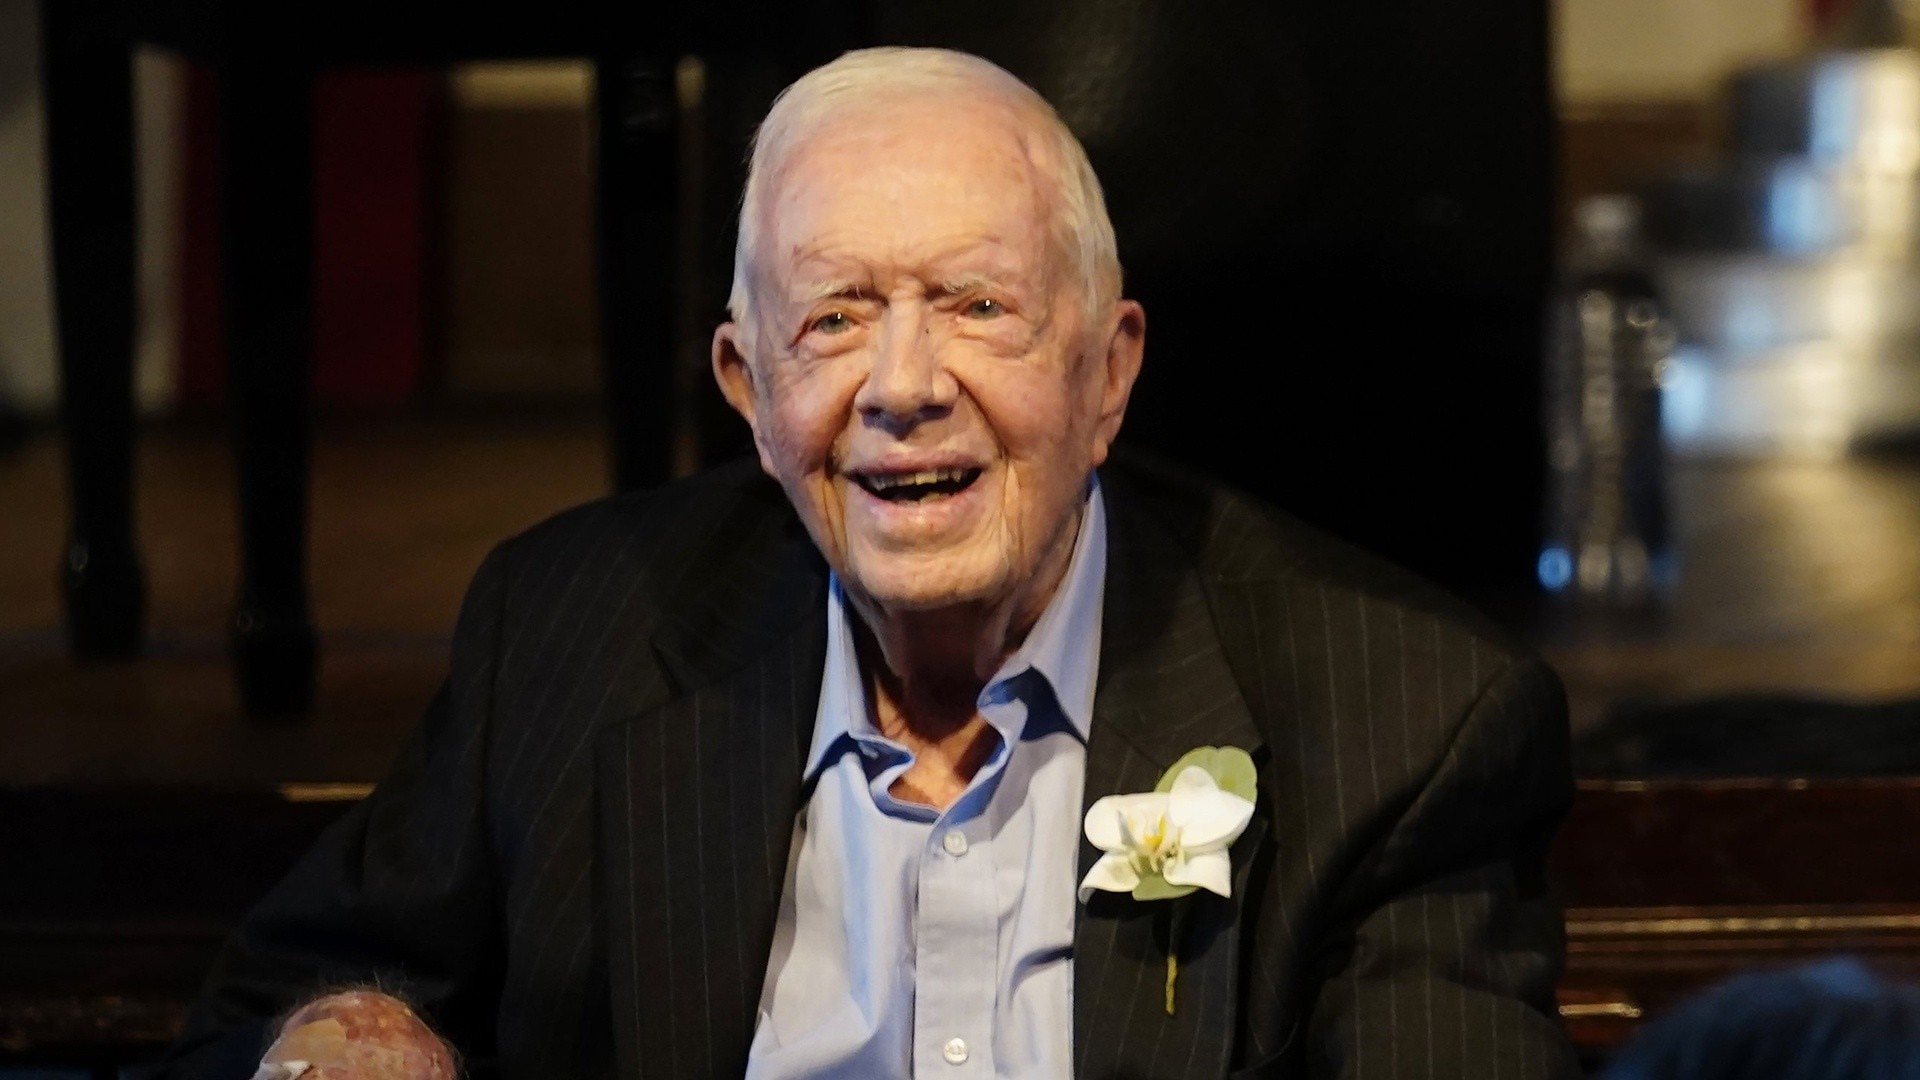 Watch TODAY Excerpt: Former President Jimmy Carter celebrates his 98th birthday